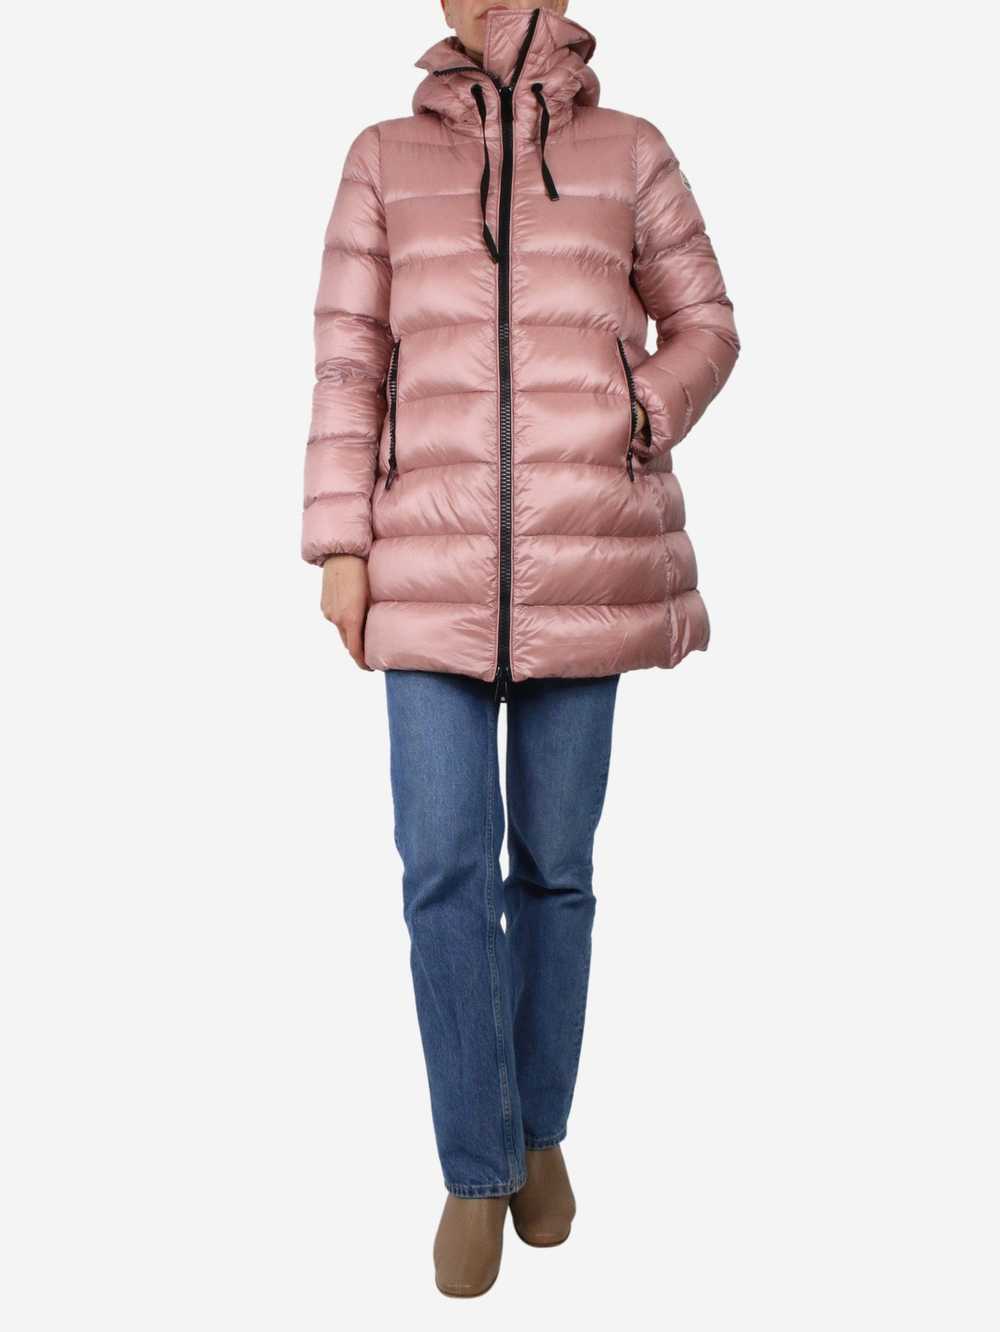 Moncler Pink puffer coat - size 2 - image 2